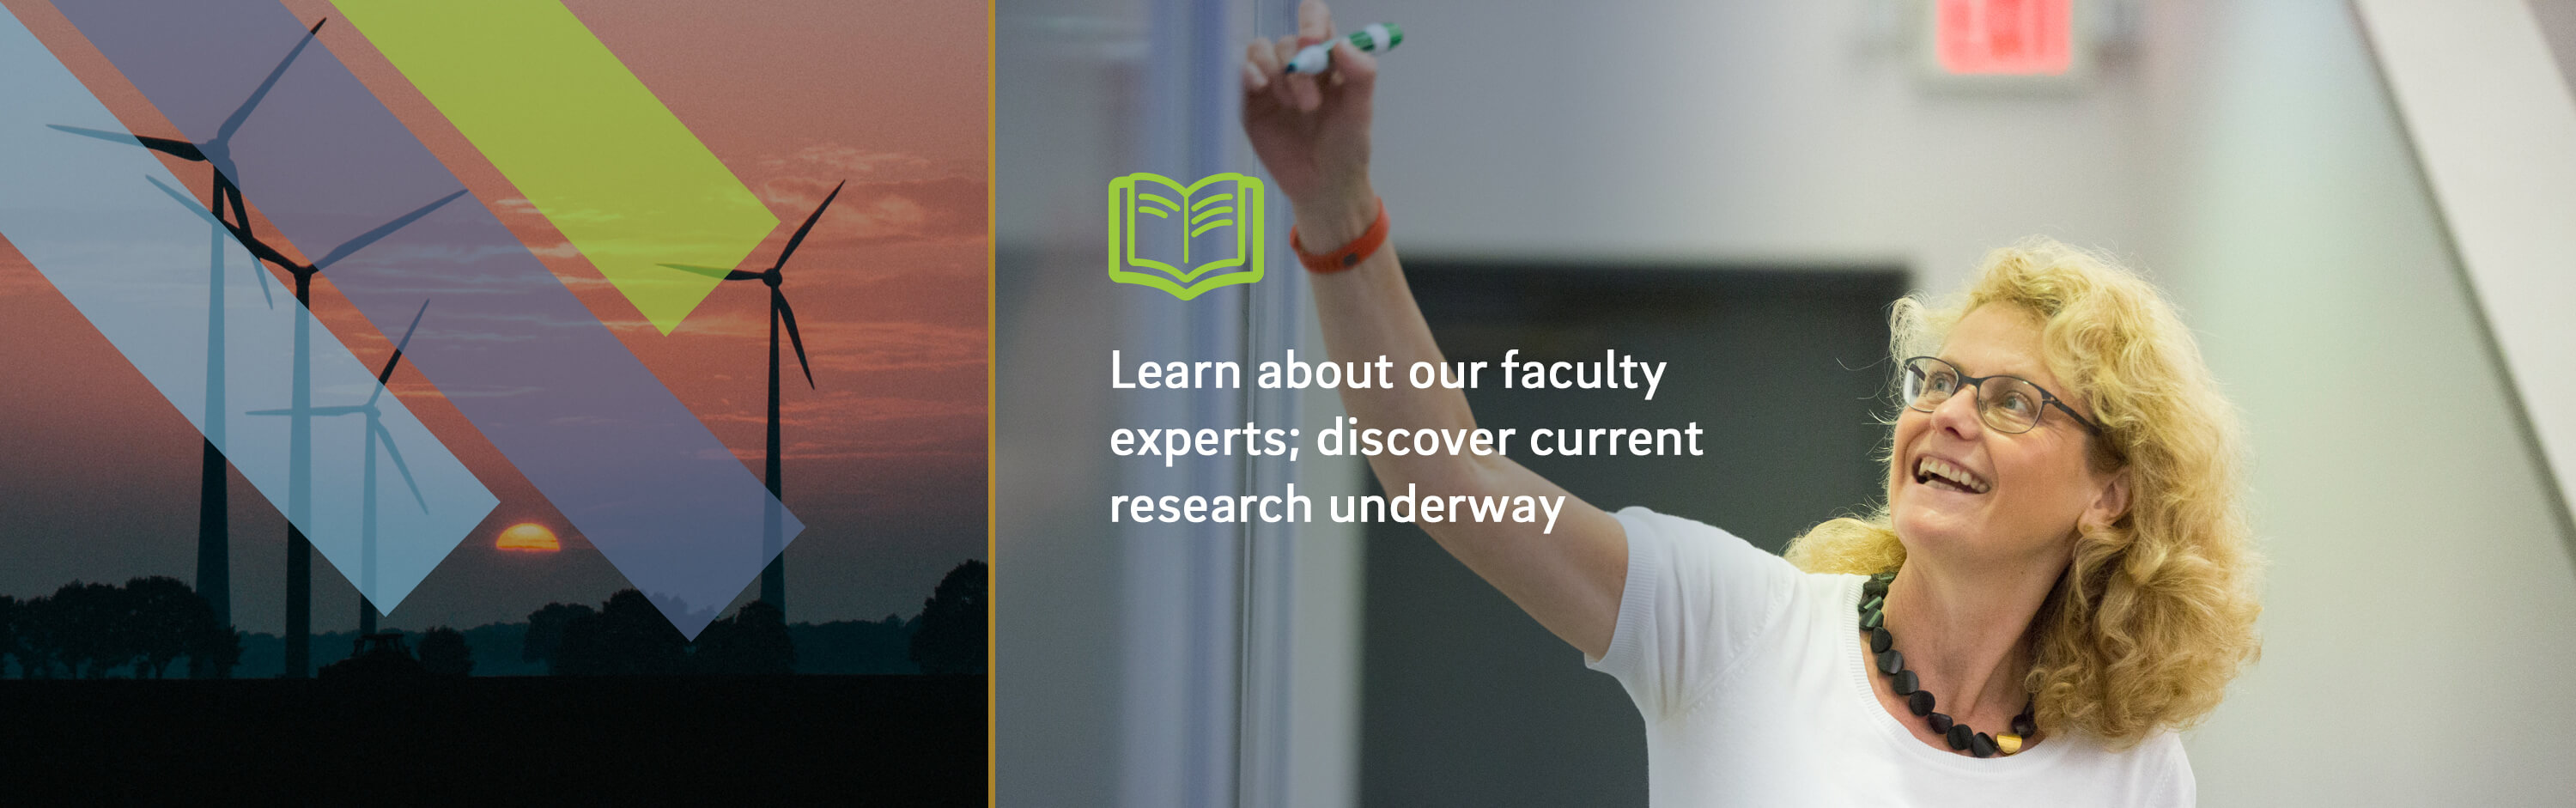 Faculty research